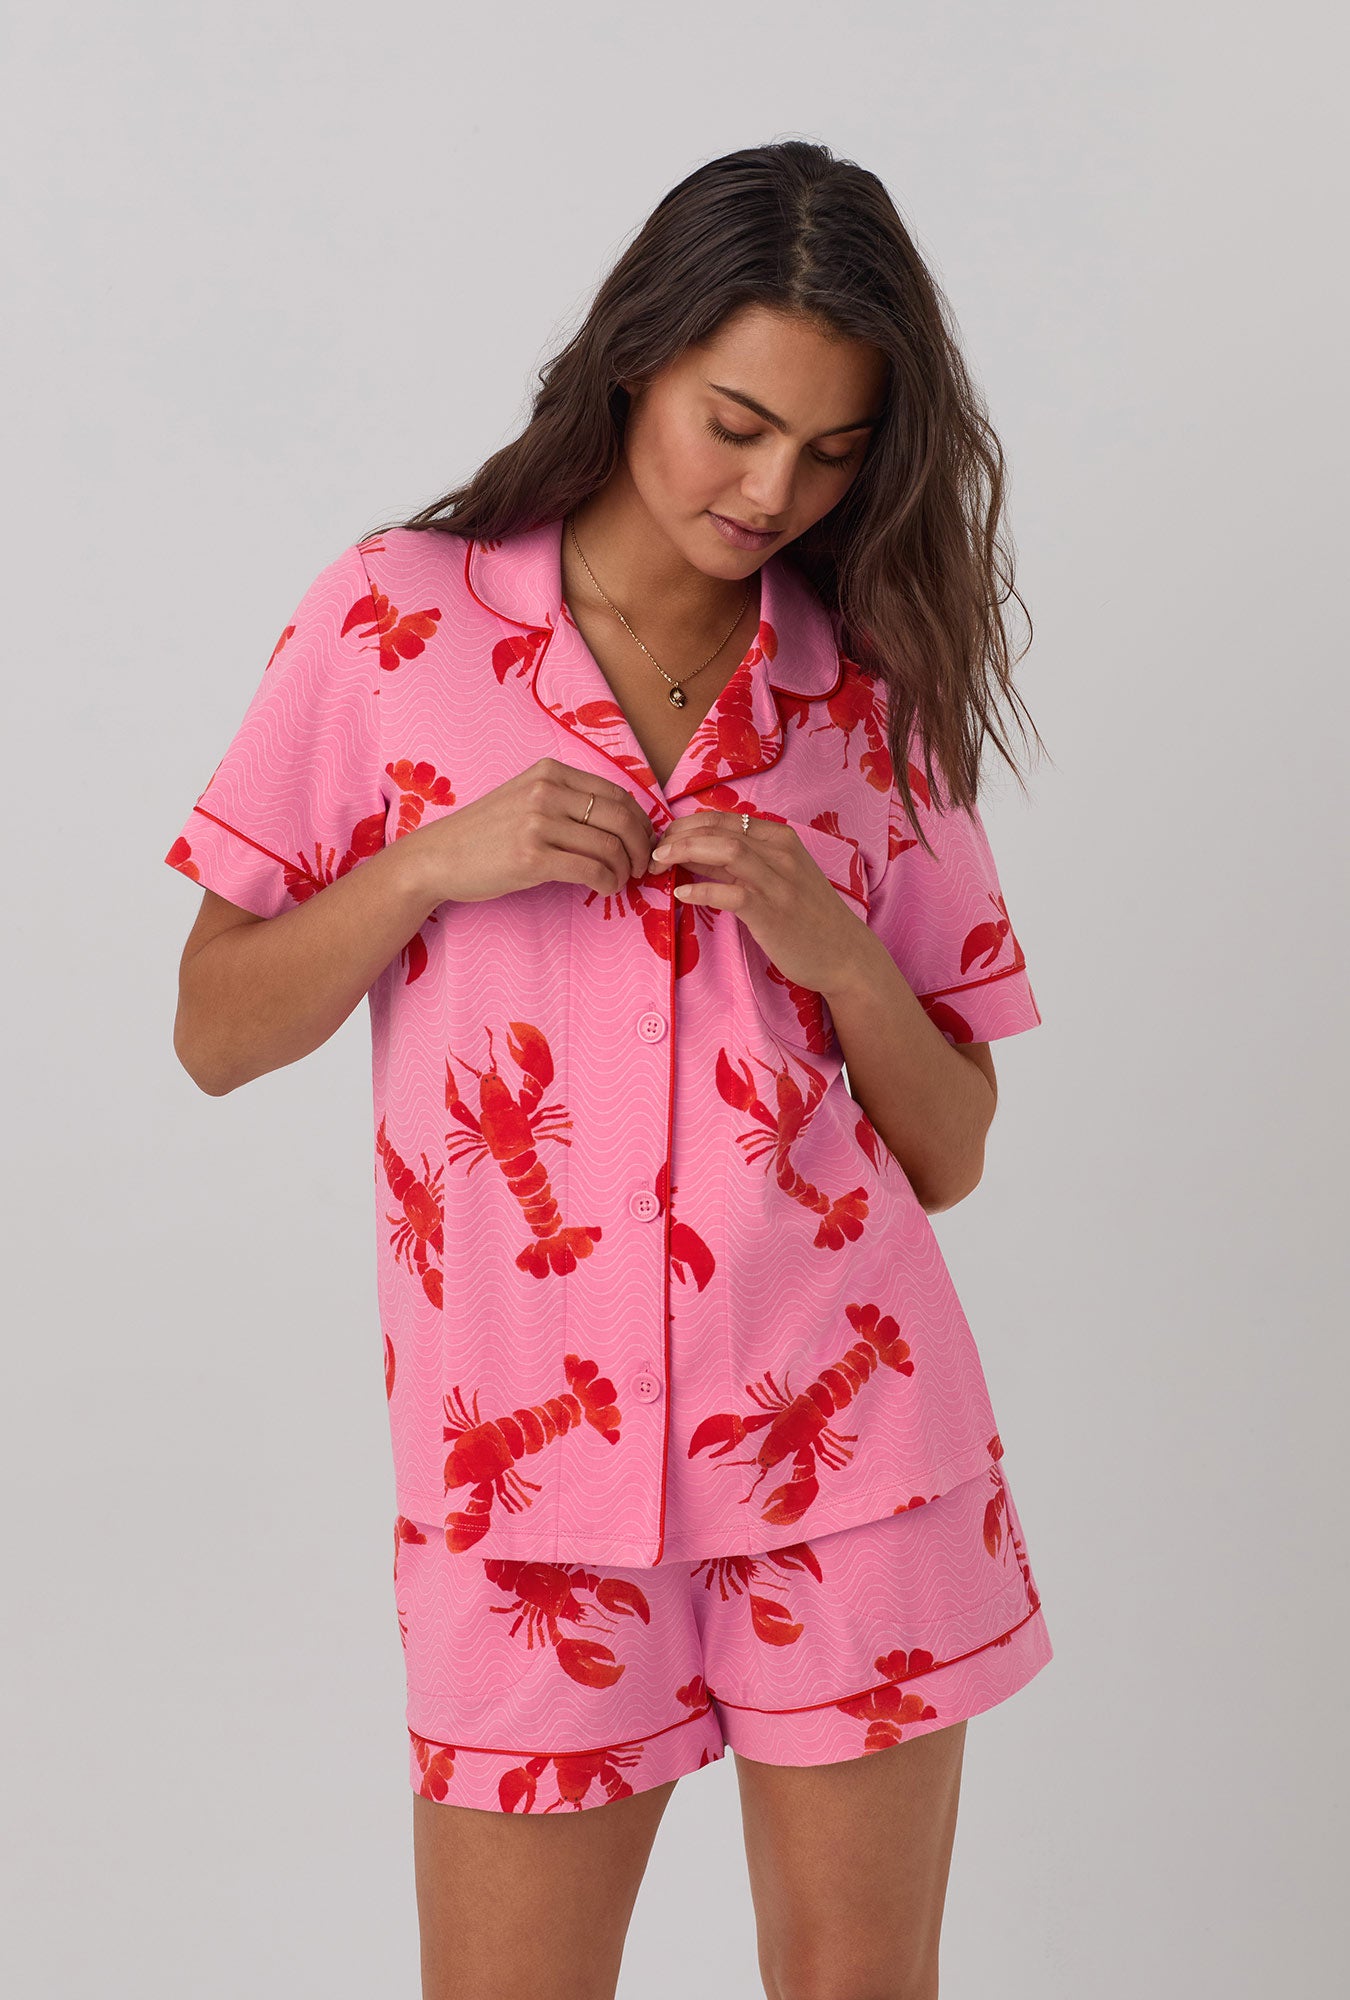 A lady wearing  pink  Short Sleeve Classic Shorty Stretch Jersey PJ Set with Lobster Fest print.